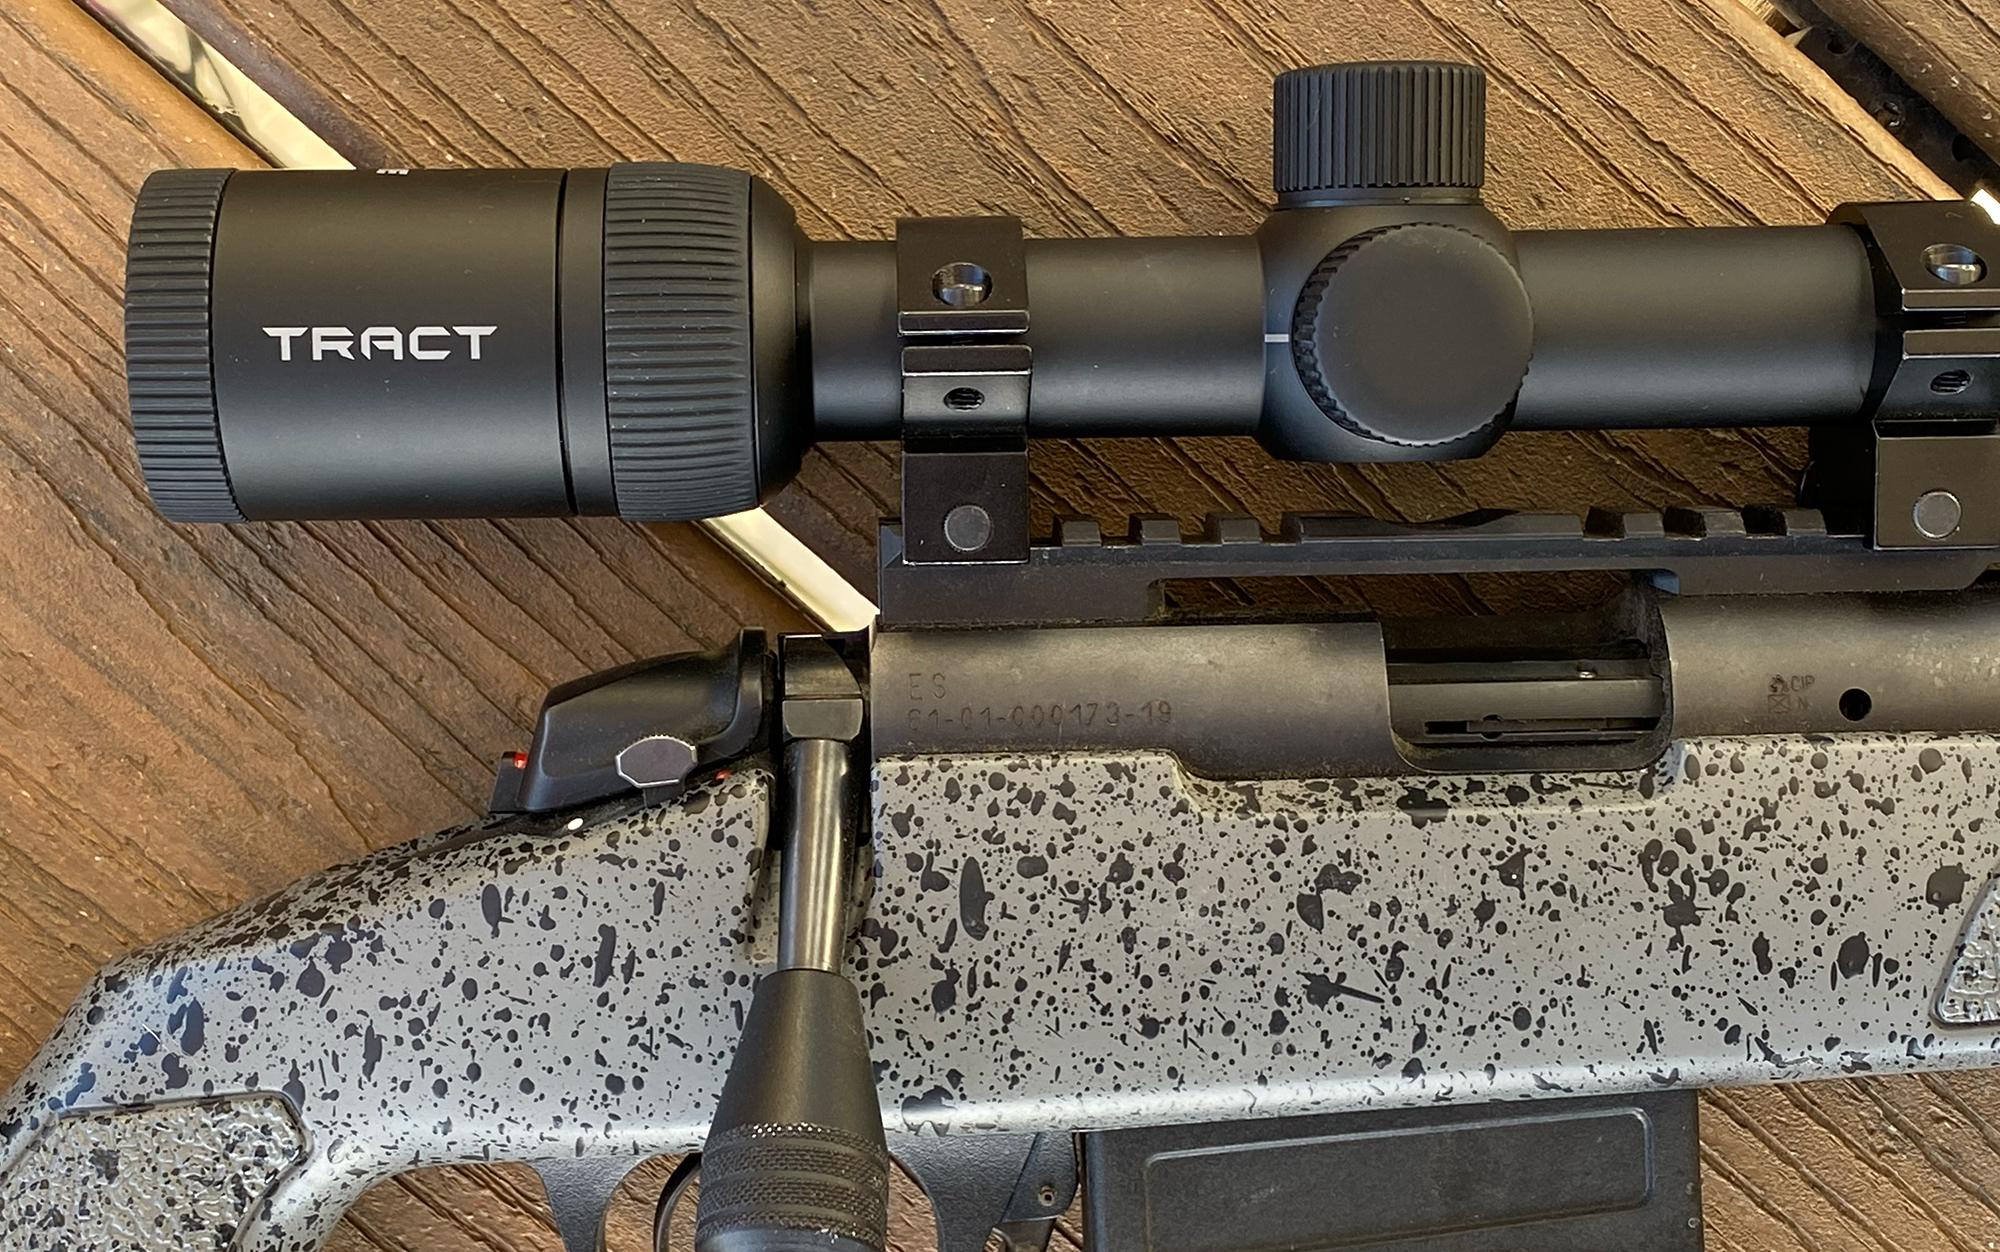 The Tract scope is mounted on a rifle.